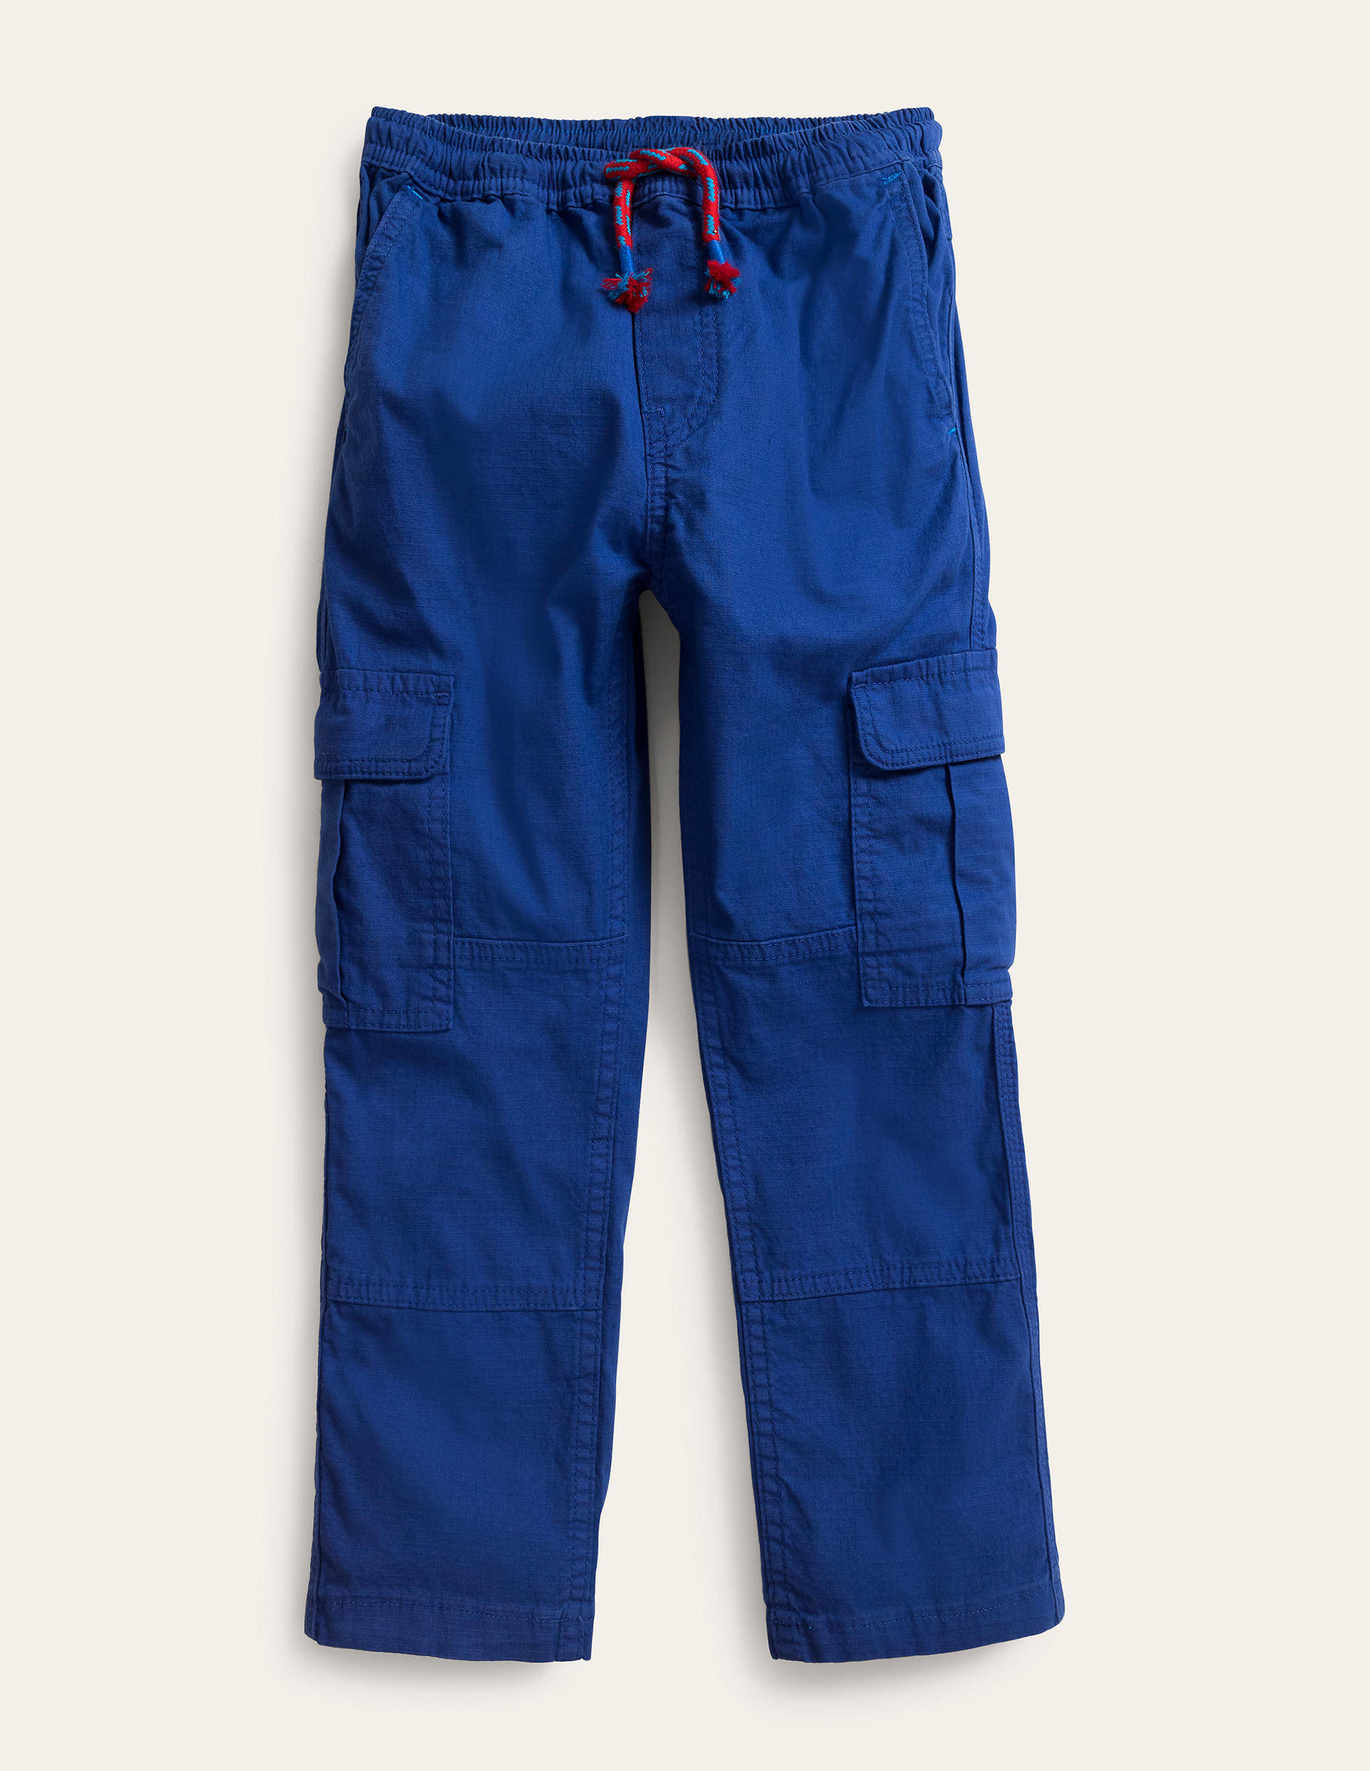 Boden Cargo Pull-on Pants - Starboard Blue